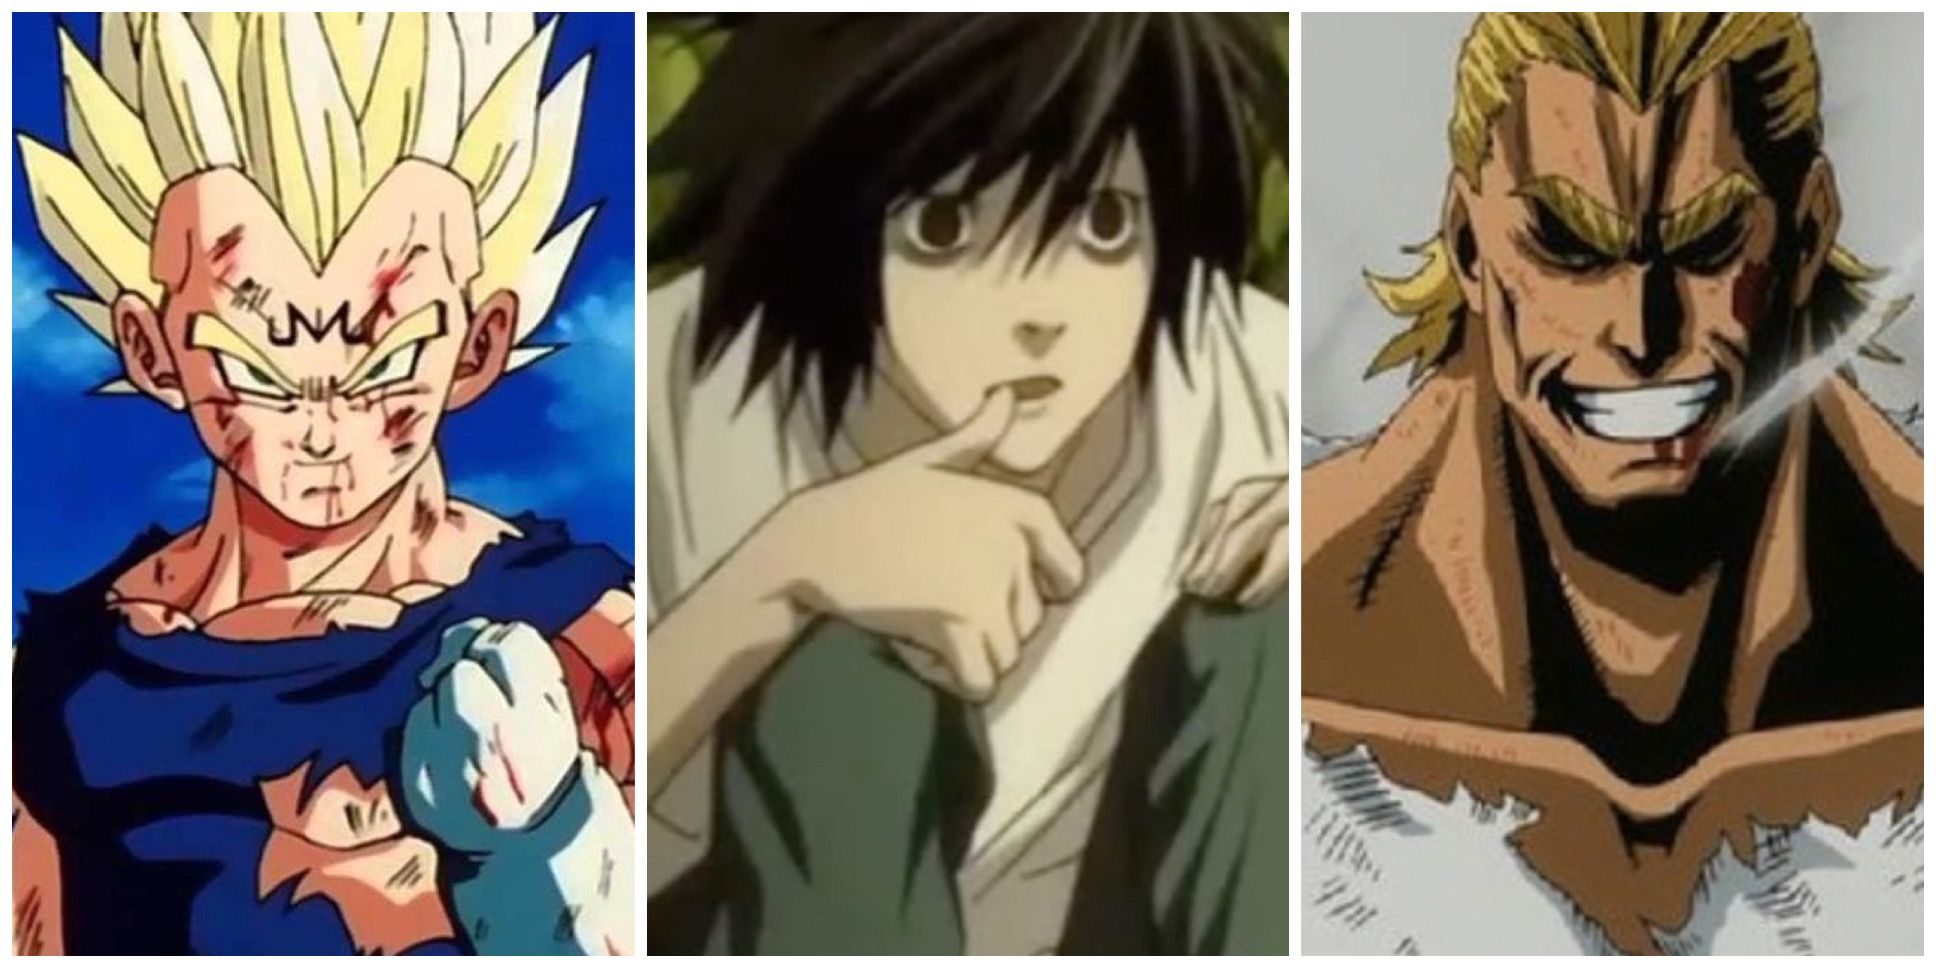 Vegeta from Dragon Ball, L from Death Note and All Might from My Hero Academia